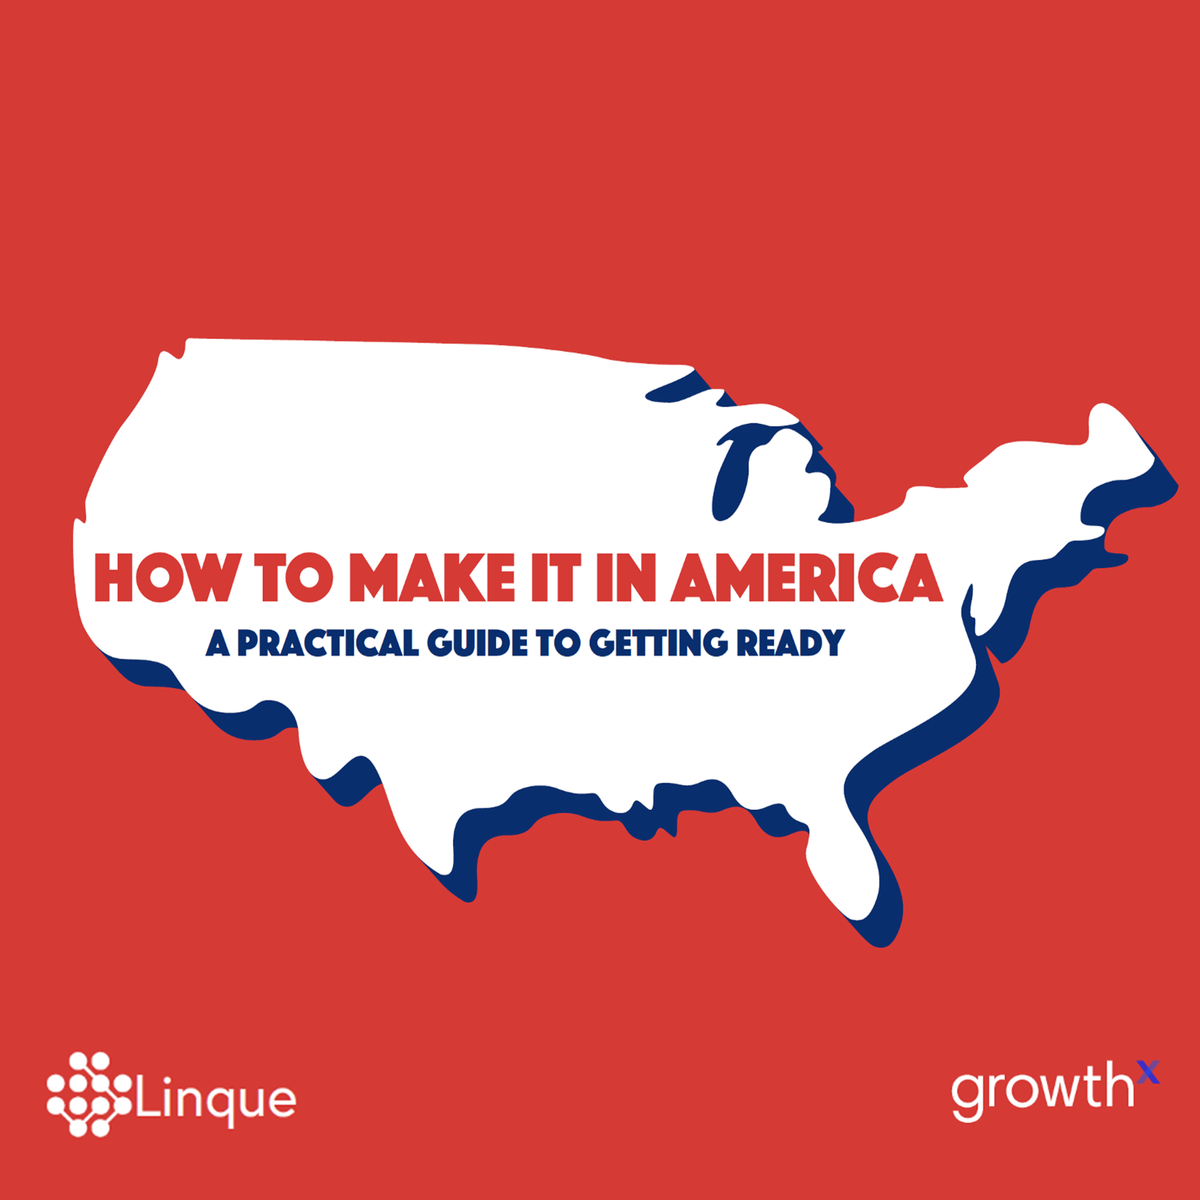 How To Make It In America: A Practical Guide To Getting Ready